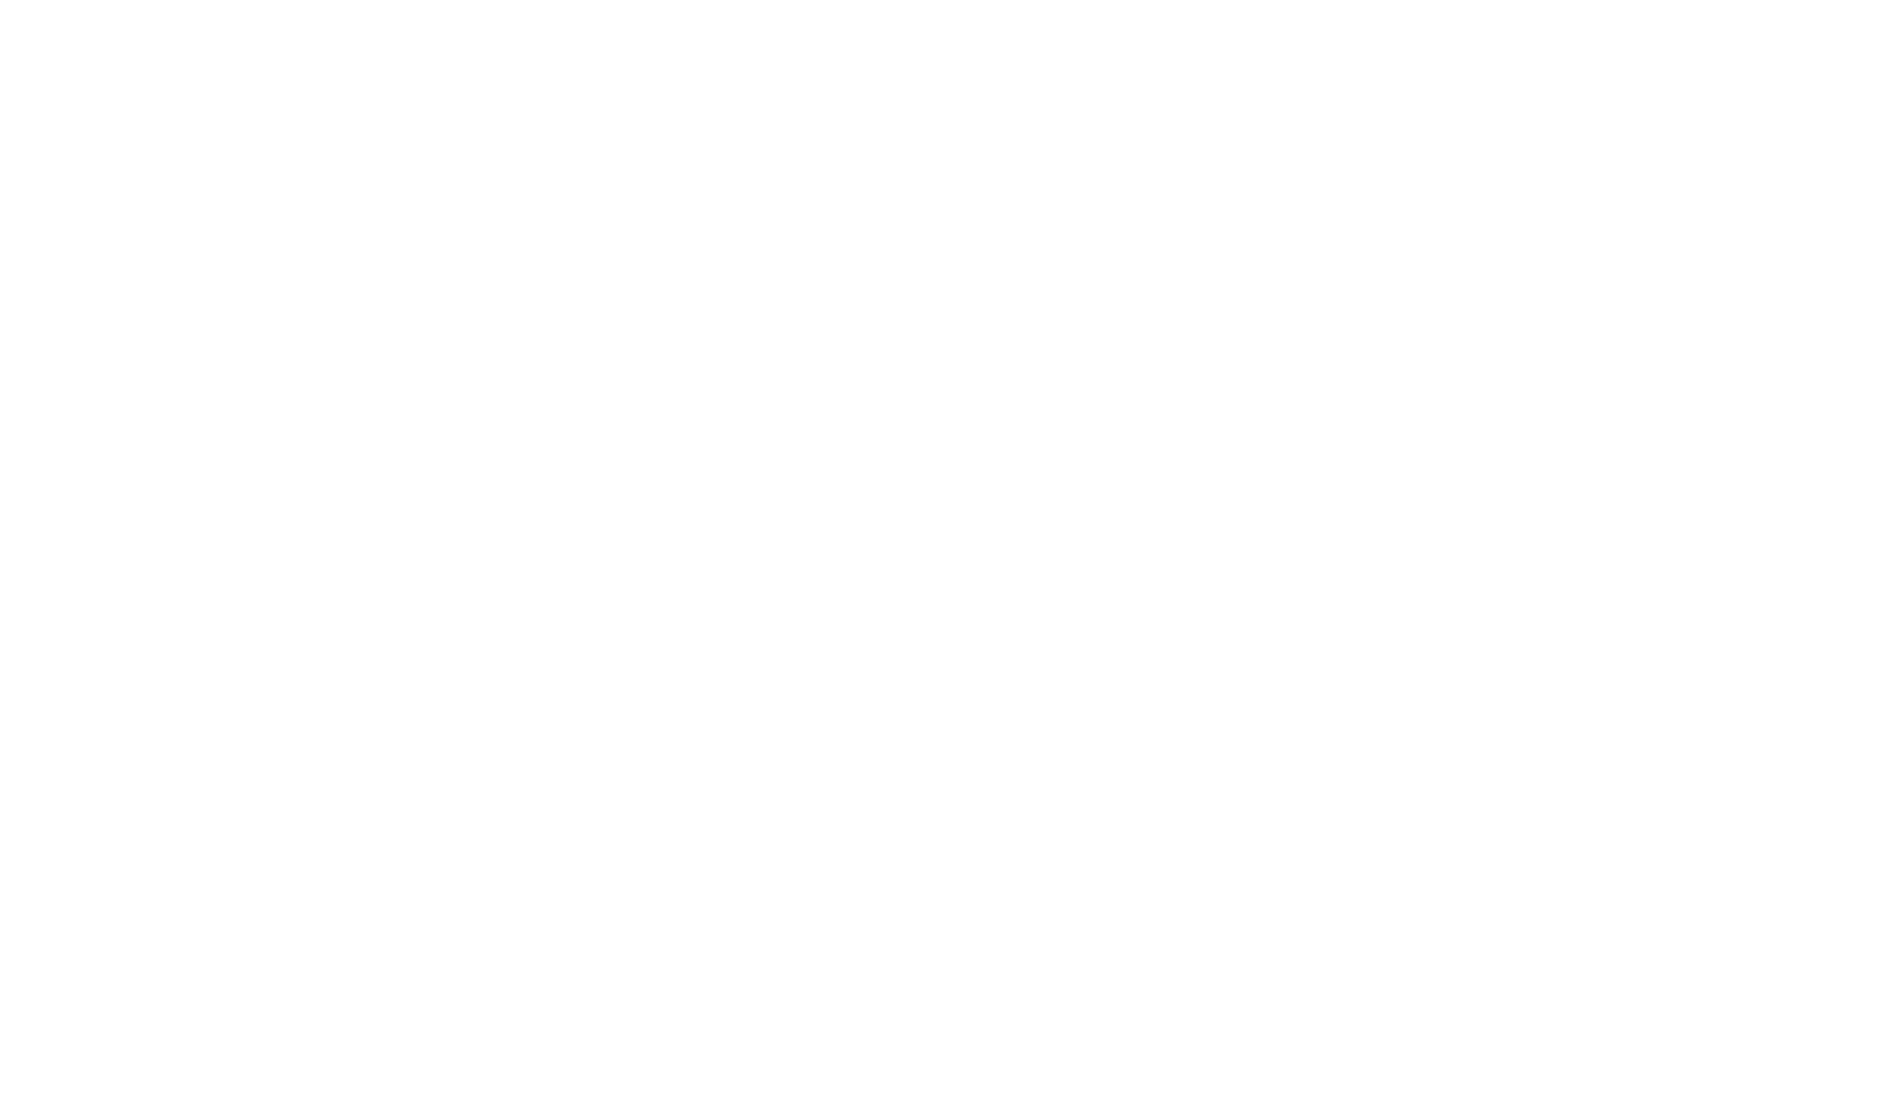 Les fabricants - logo client oliviers-&-co